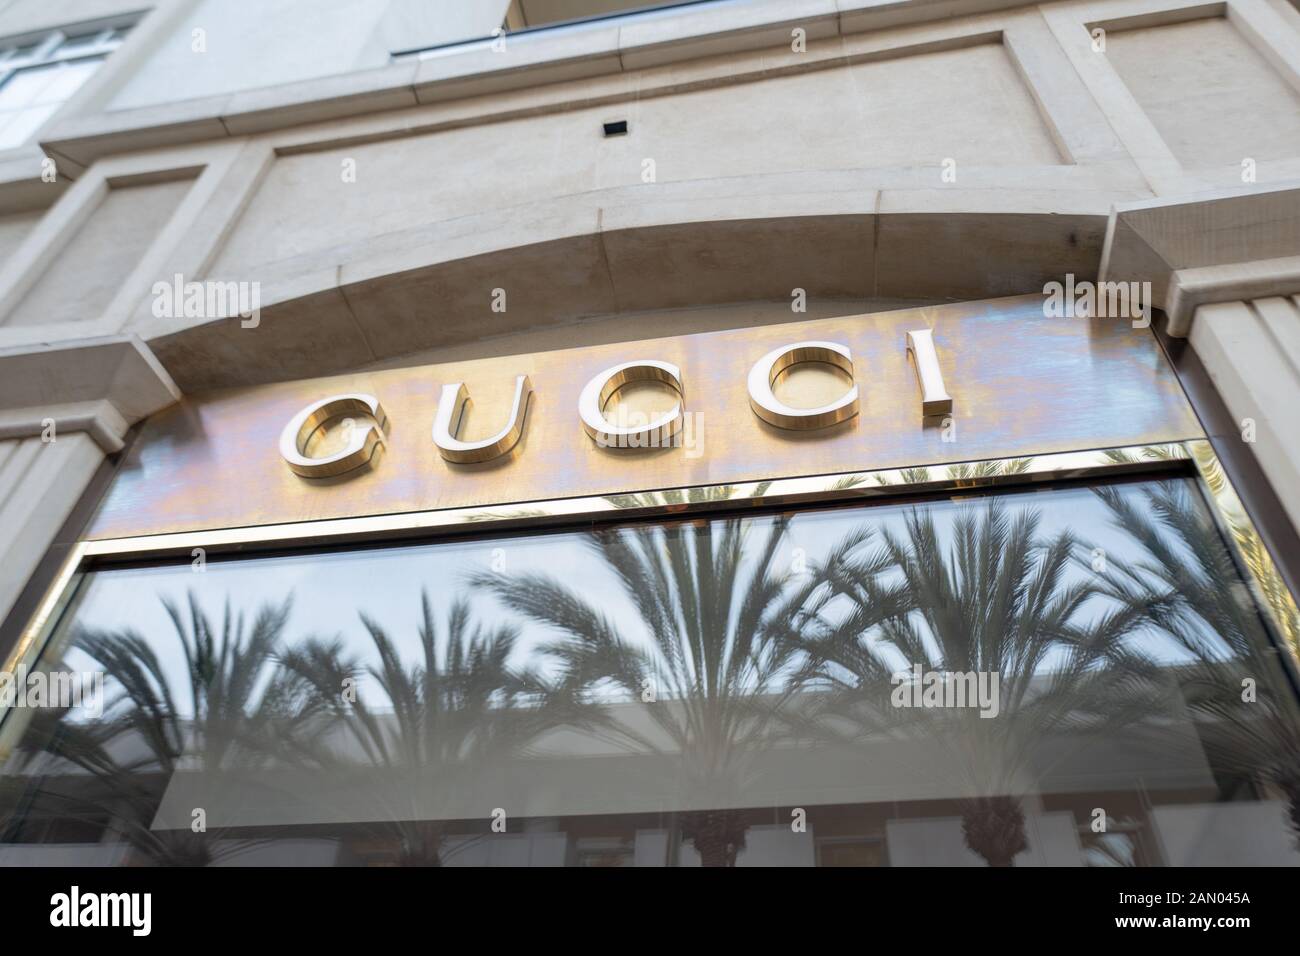 Facade of gucci retail store hi-res stock photography and images - Alamy